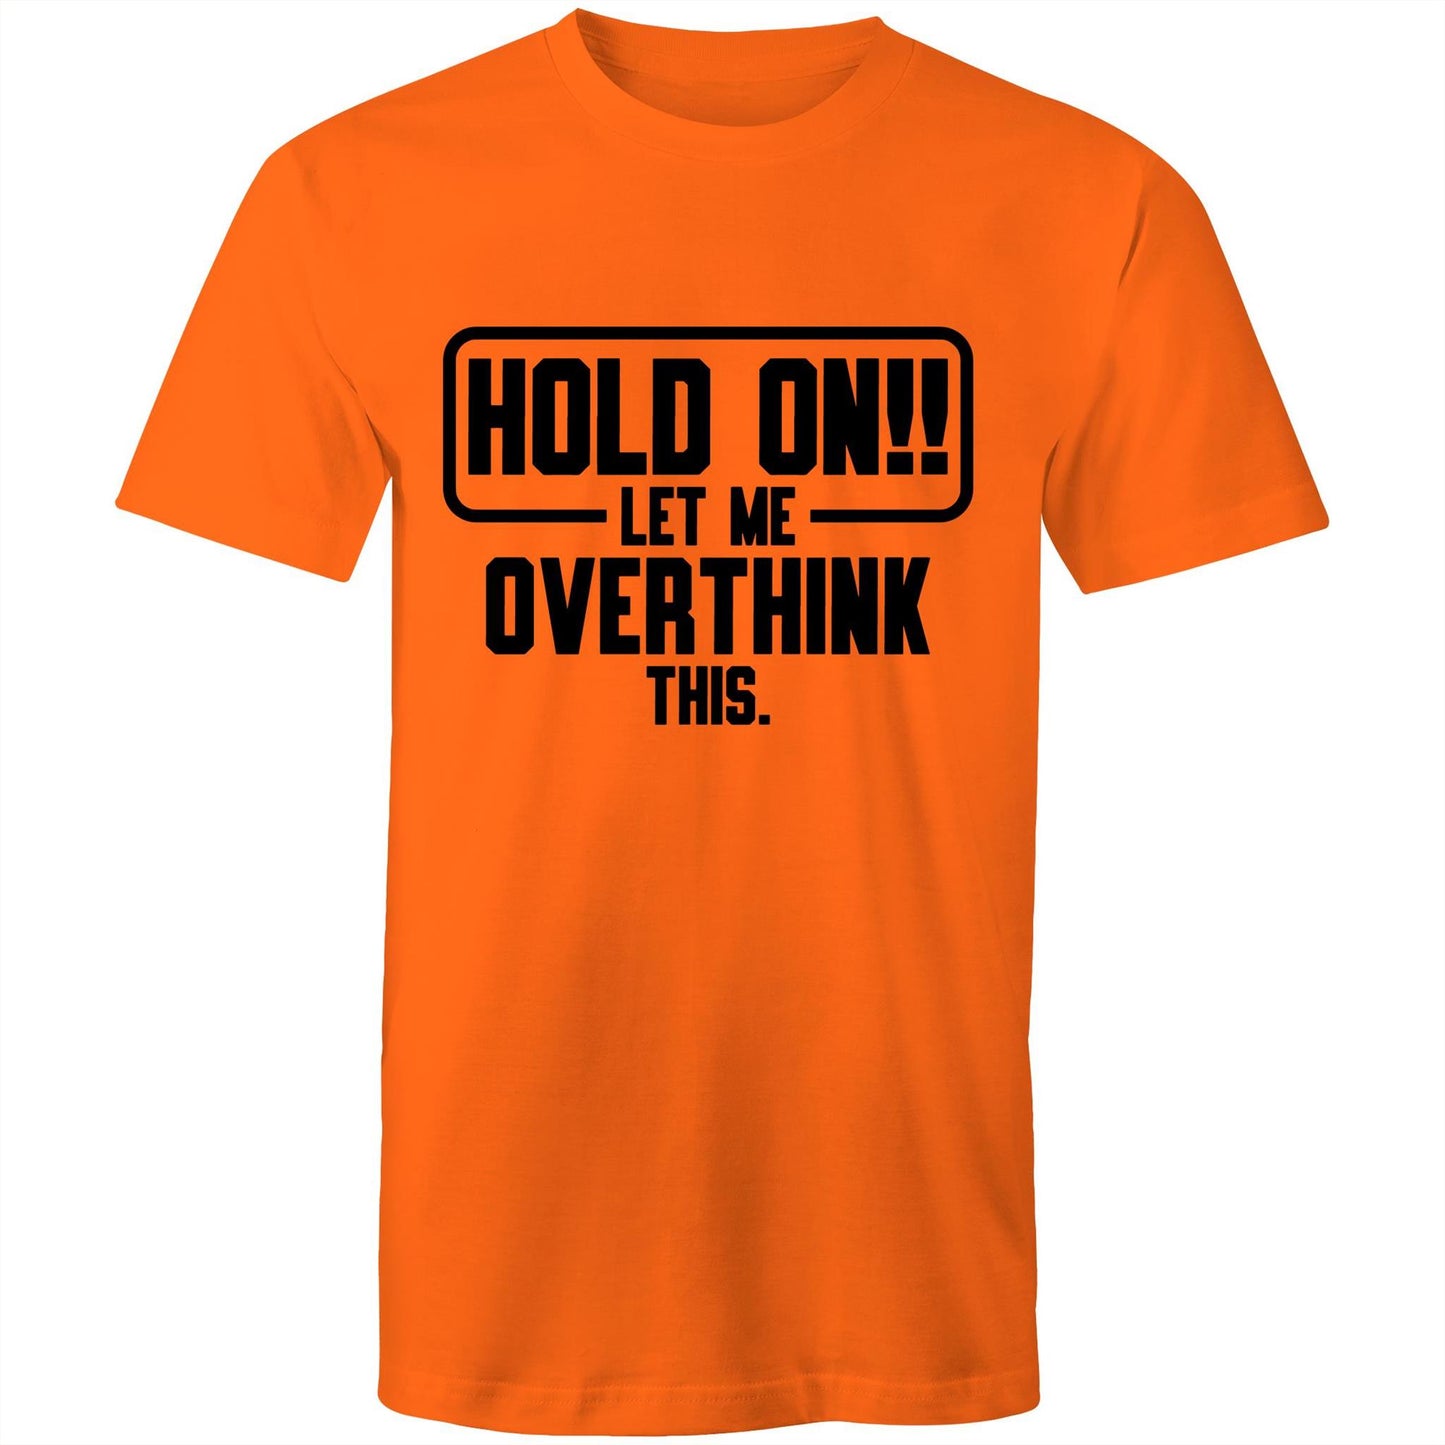 Mens T-Shirt - Hold On Let Me Overthink This